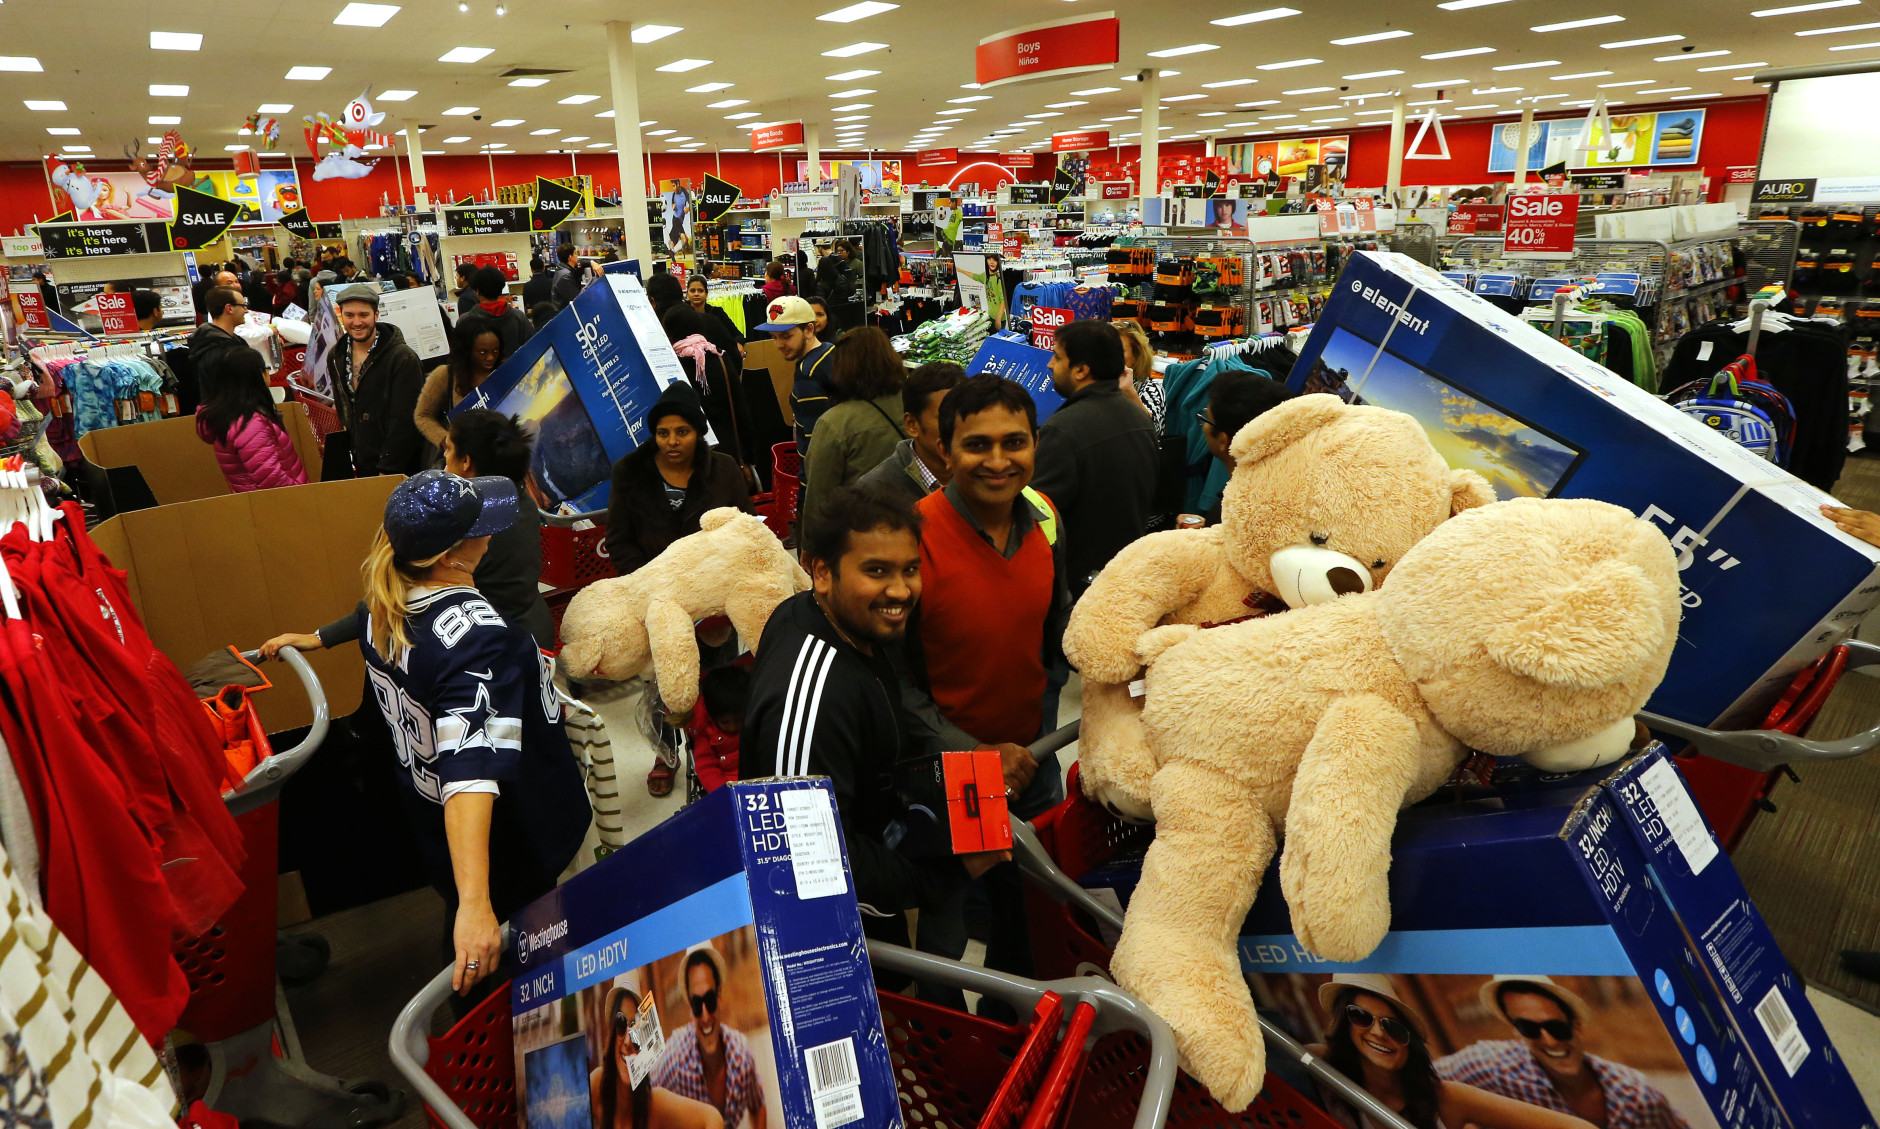 IMAGE DISTRIBUTED FOR TARGET - Guests take advantage of Target's Black Friday sales at the Jersey City, N.J. store Thursday, Nov. 26, 2015. (Noah K. Murray/ AP Images for Target)